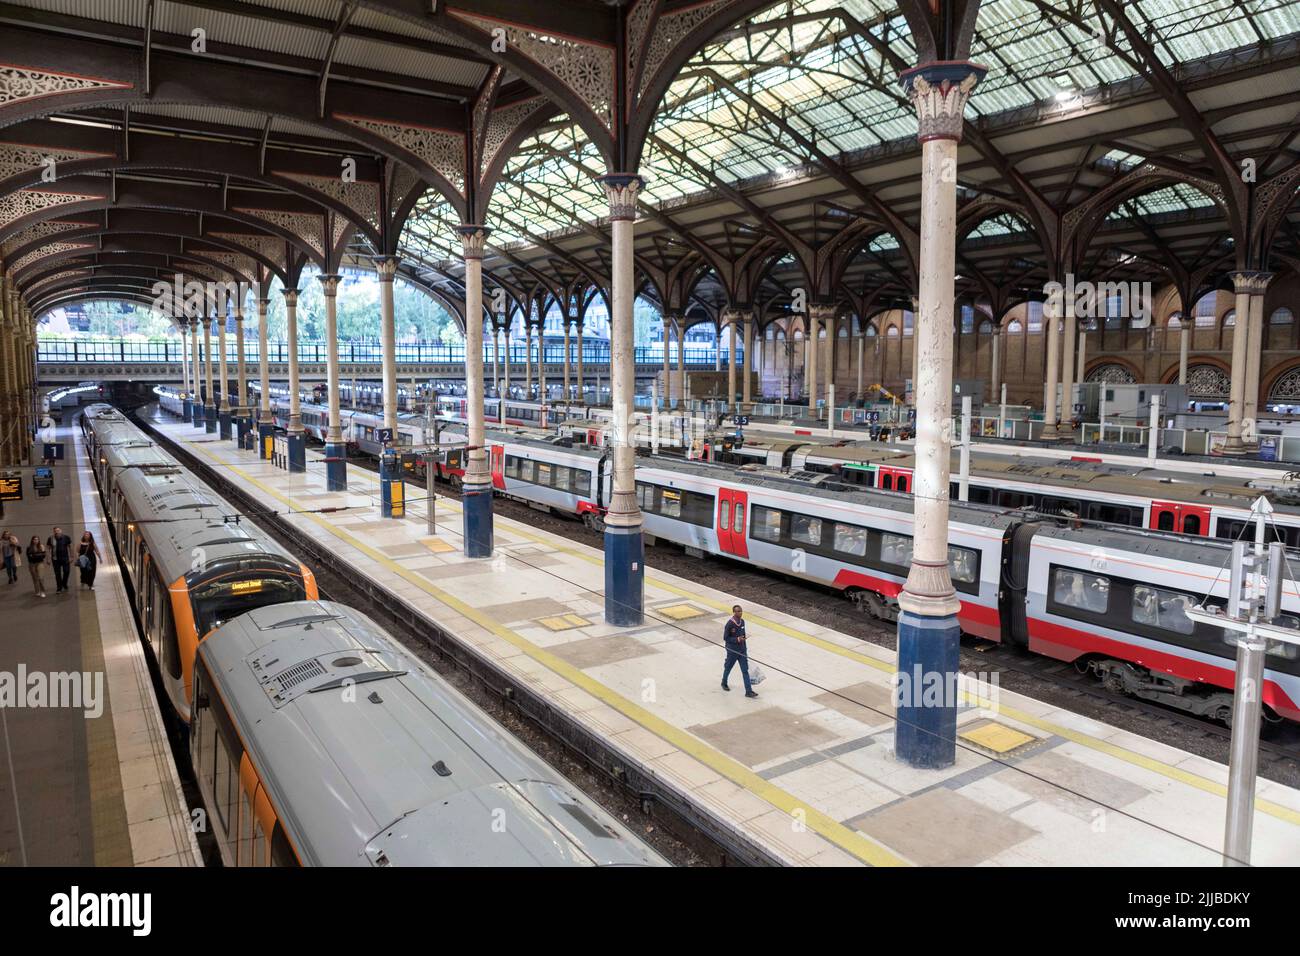 A rail strike led by Greateranglia today will see reduced services to London Liverpool Street train station. Aslef, the train driver’s union, has also Stock Photo